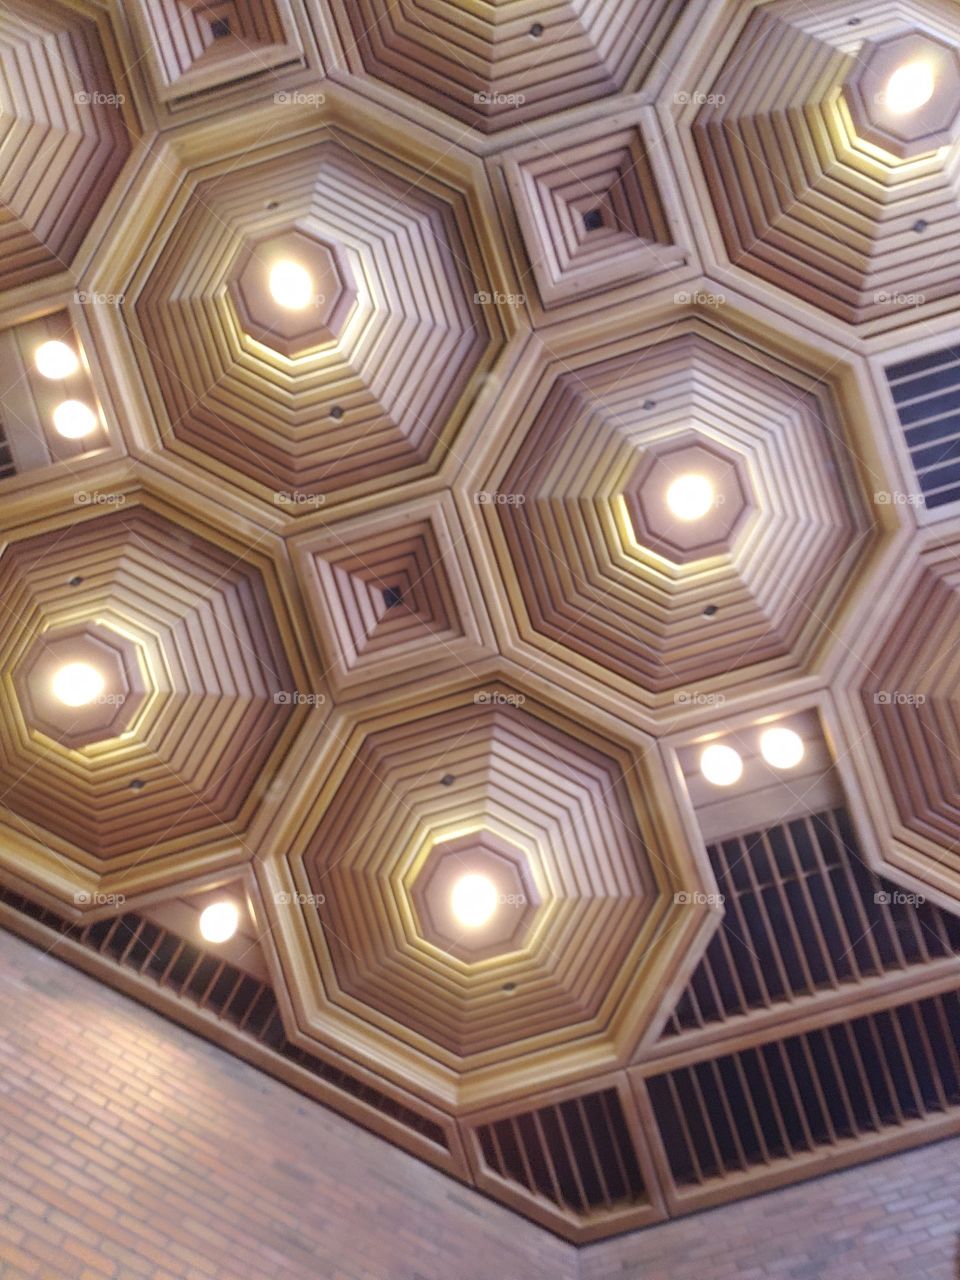 ceiling in veterans affairs building in Seattle WA. Grand enterance